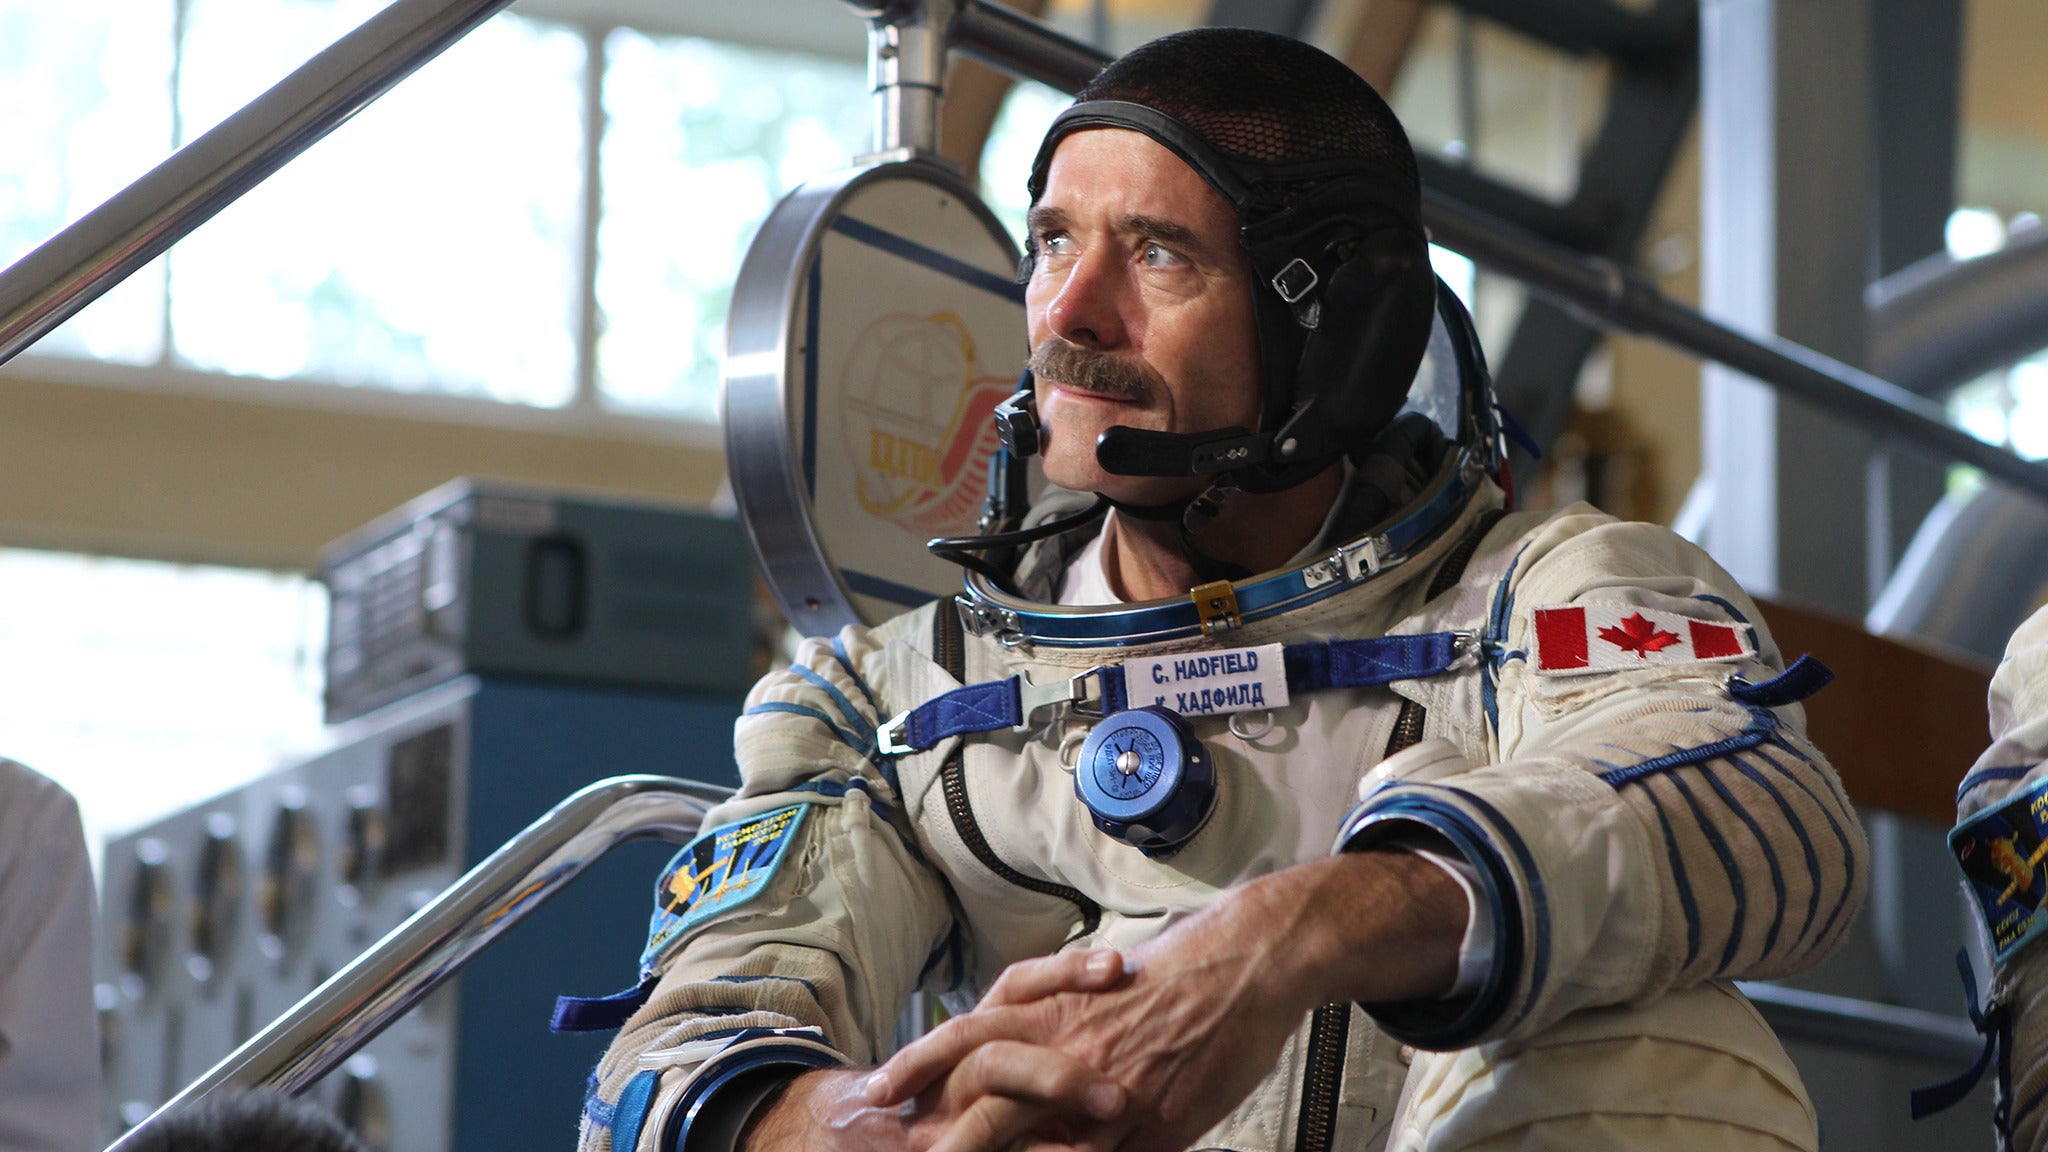 Chris Hadfield VIP Upgrade (Ticket Not Included) in North Bay promo photo for VIP presale offer code